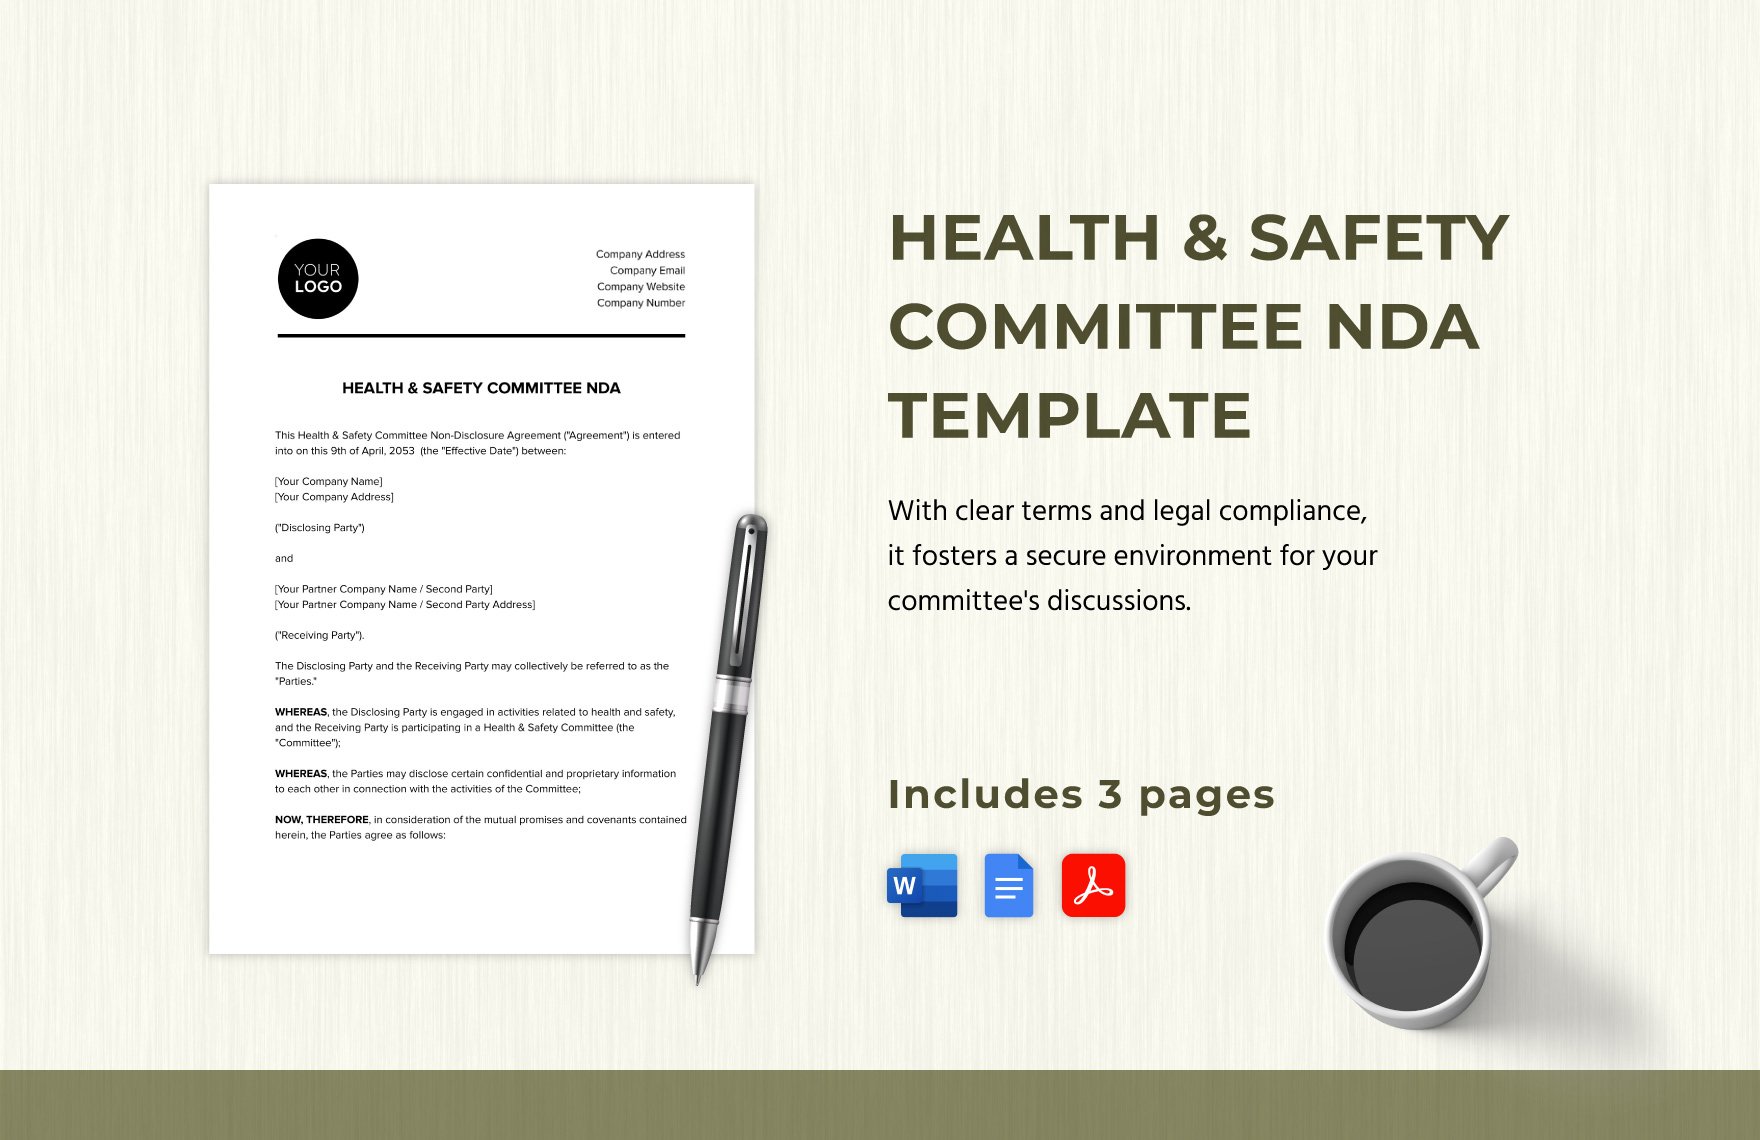 Health & Safety Committee NDA Template